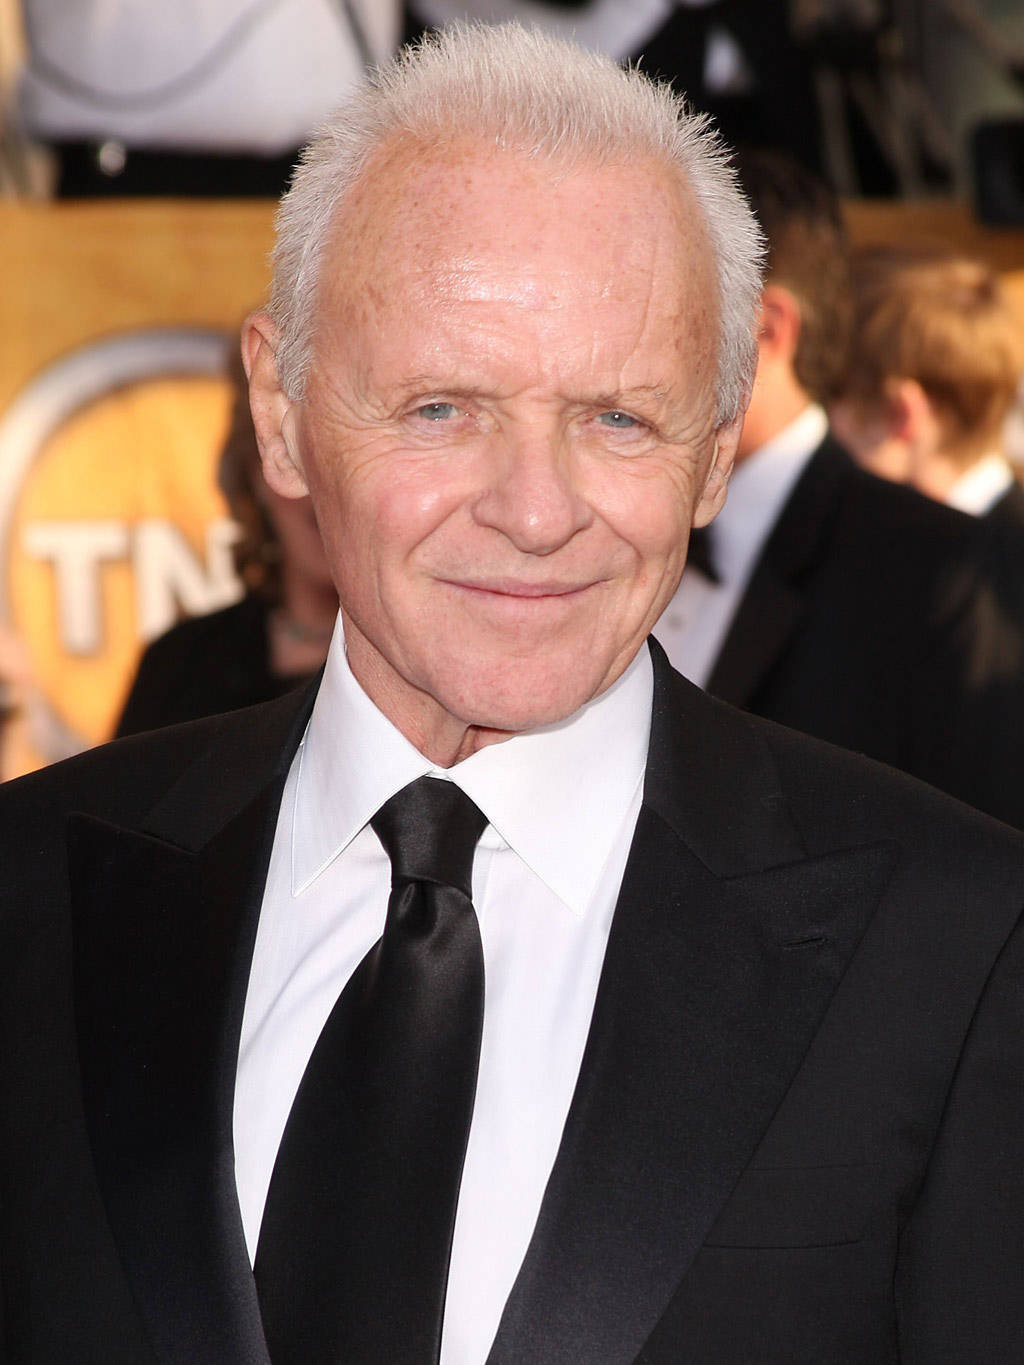 Anthonyhopkins Ler. (note: This Sentence Can Be Used In The Context Of Computer Or Mobile Wallpaper Featuring A Photo Of Anthony Hopkins Smiling.) Wallpaper